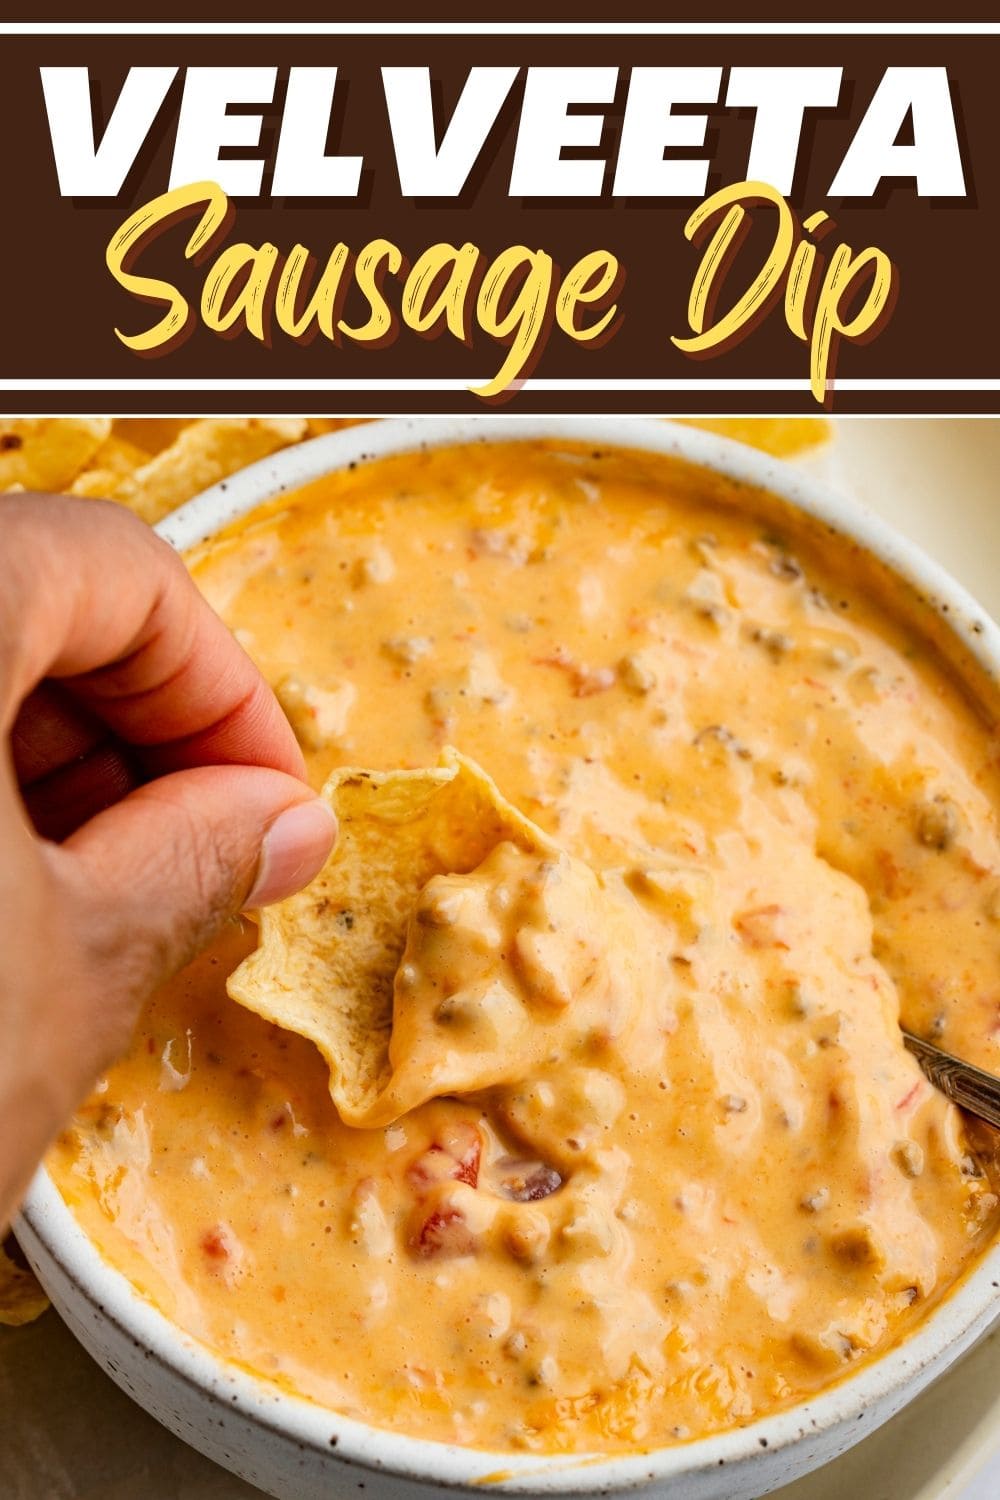 Chips dipped into a bowl of cheesy Velveeta Sausage Dip